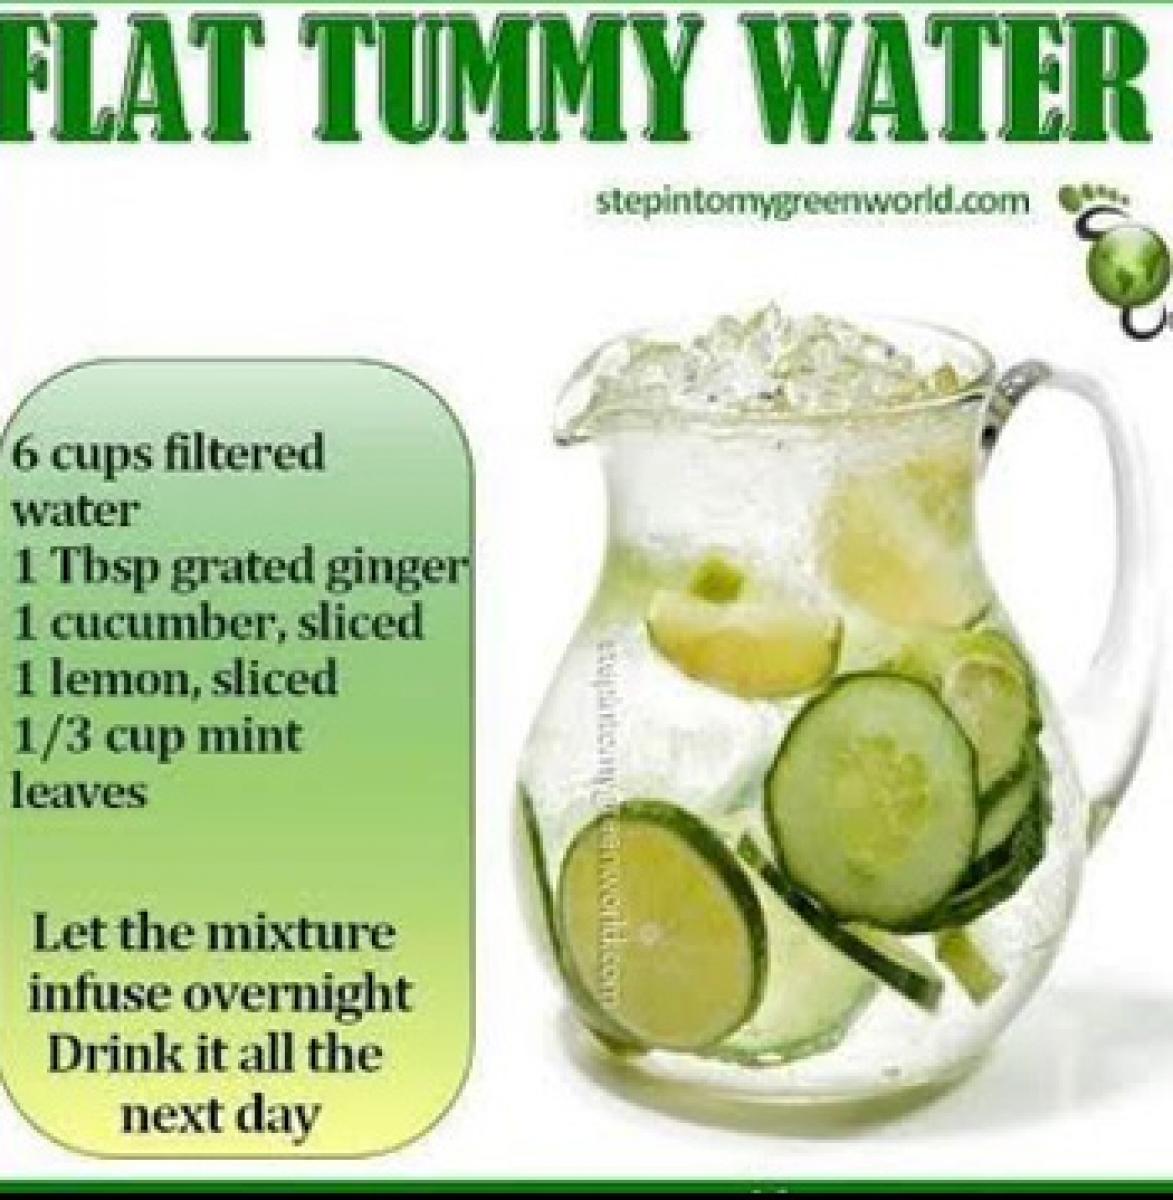 How to flatten your tummy